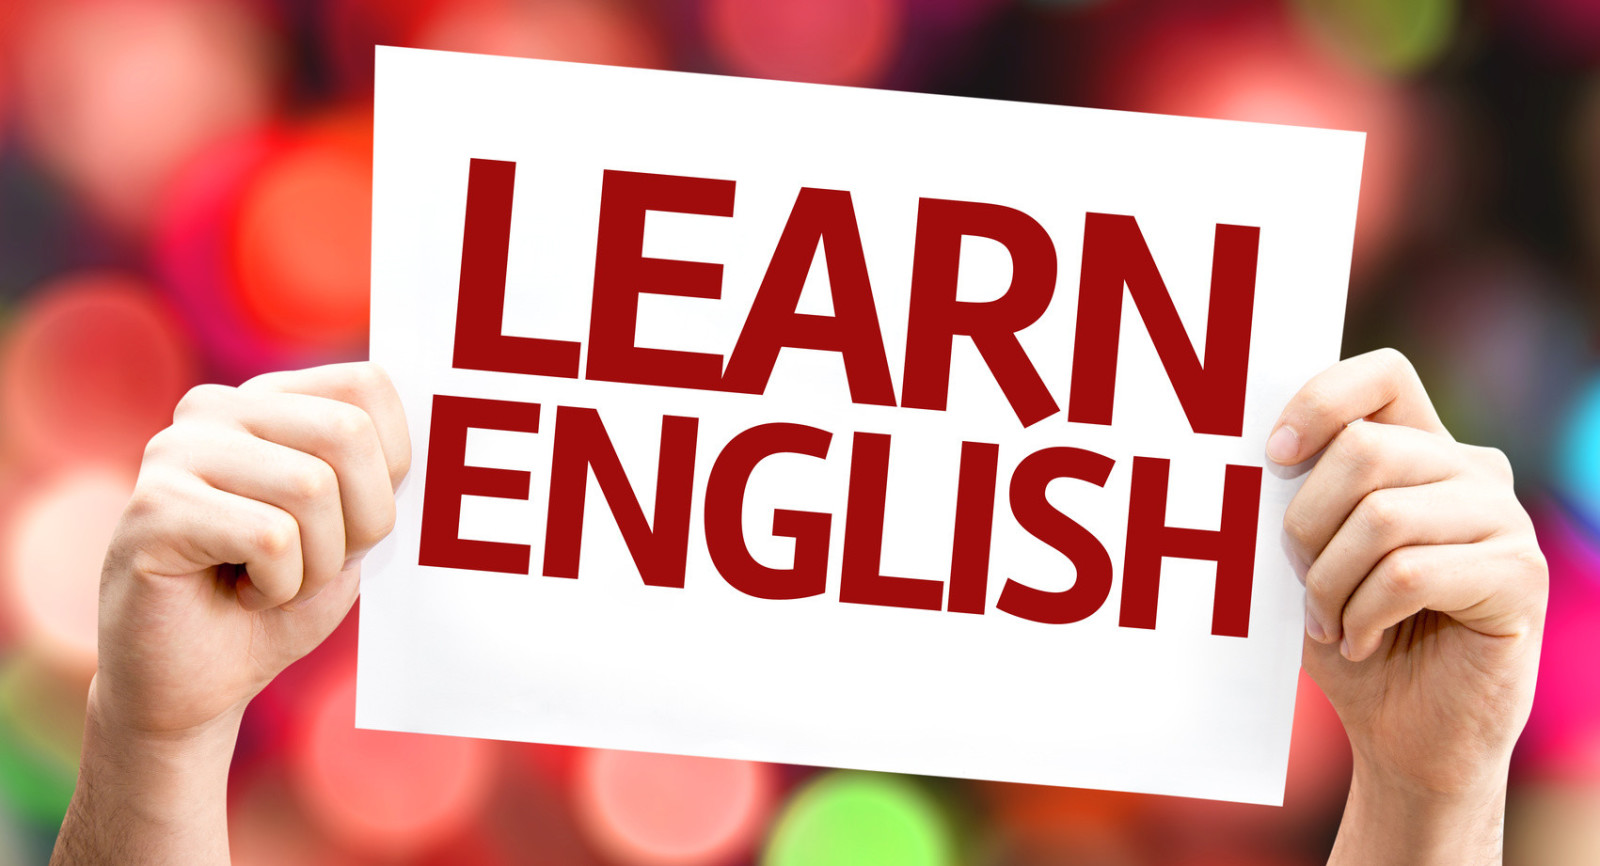 great-english-learning-tips-for-beginners-let-s-follow-this-4nids